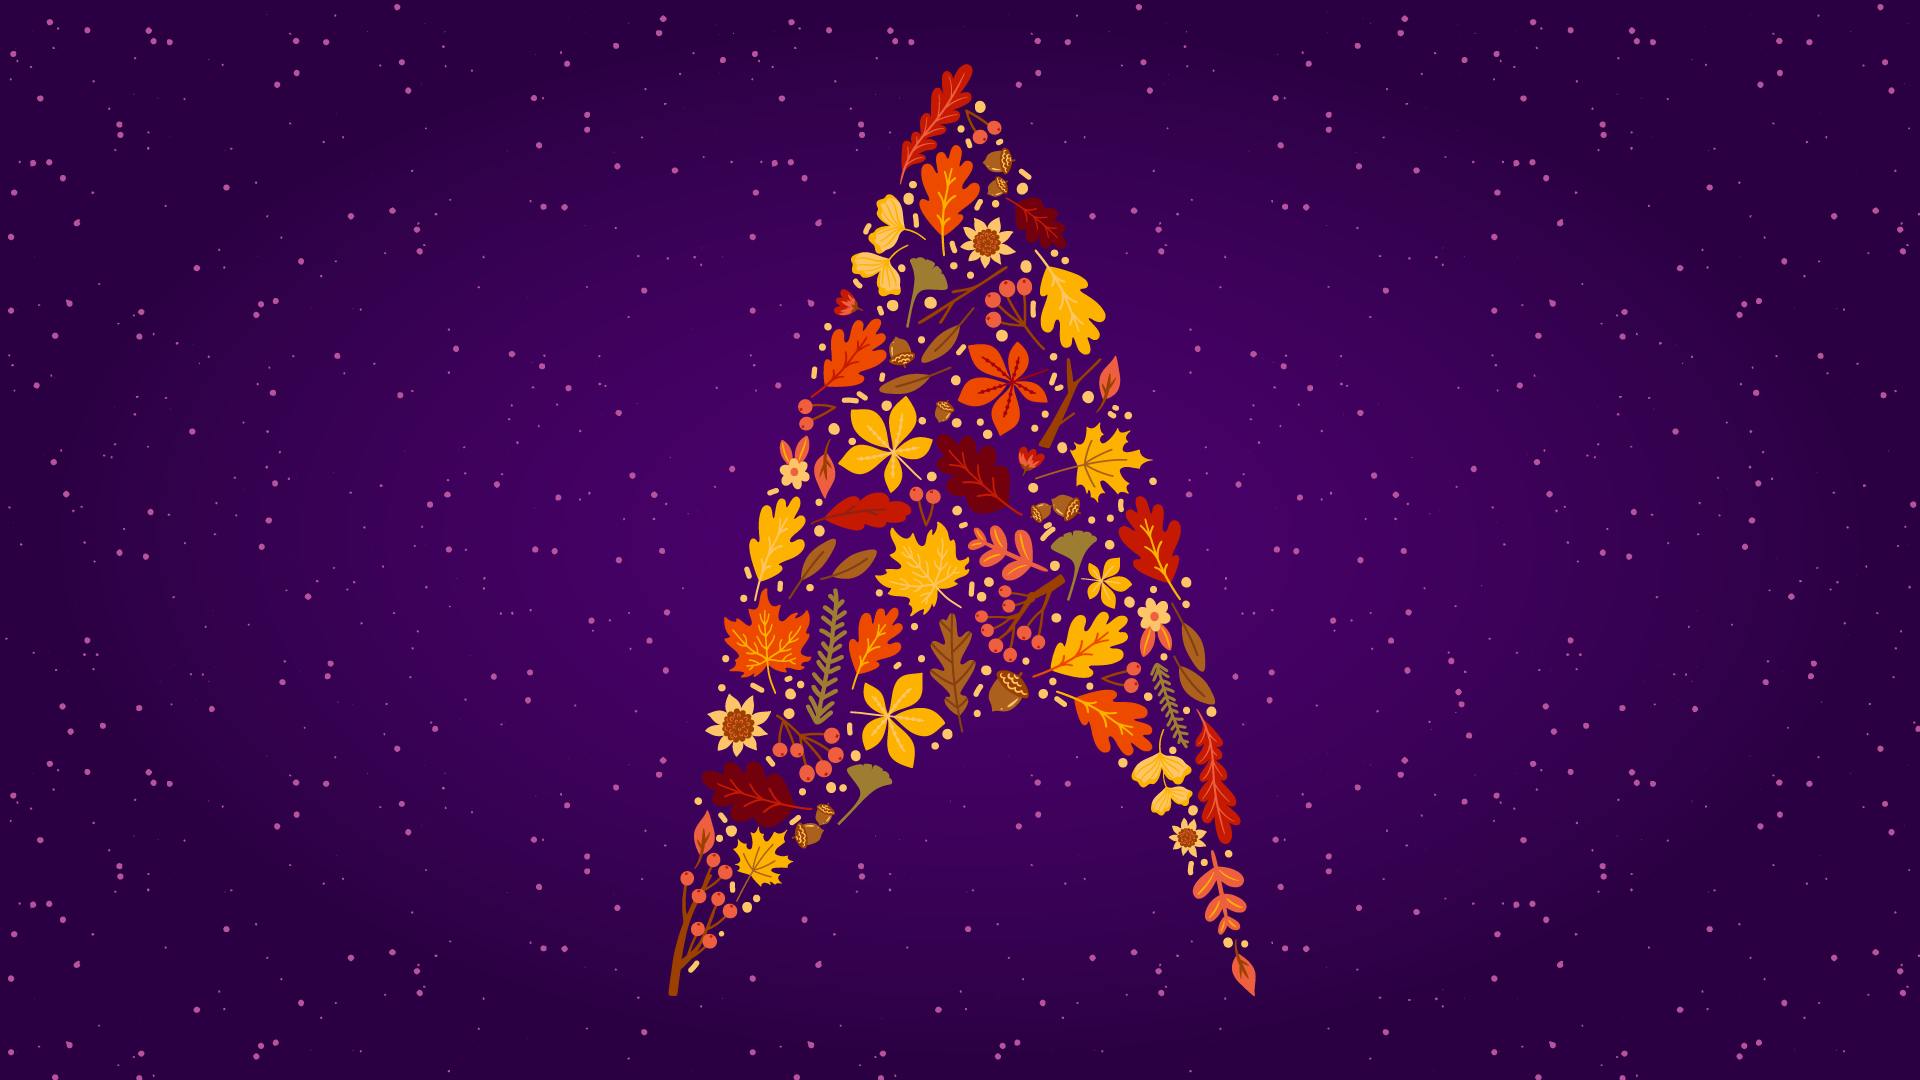 Illustration of the Star Trek Delta filled with autumn leaves